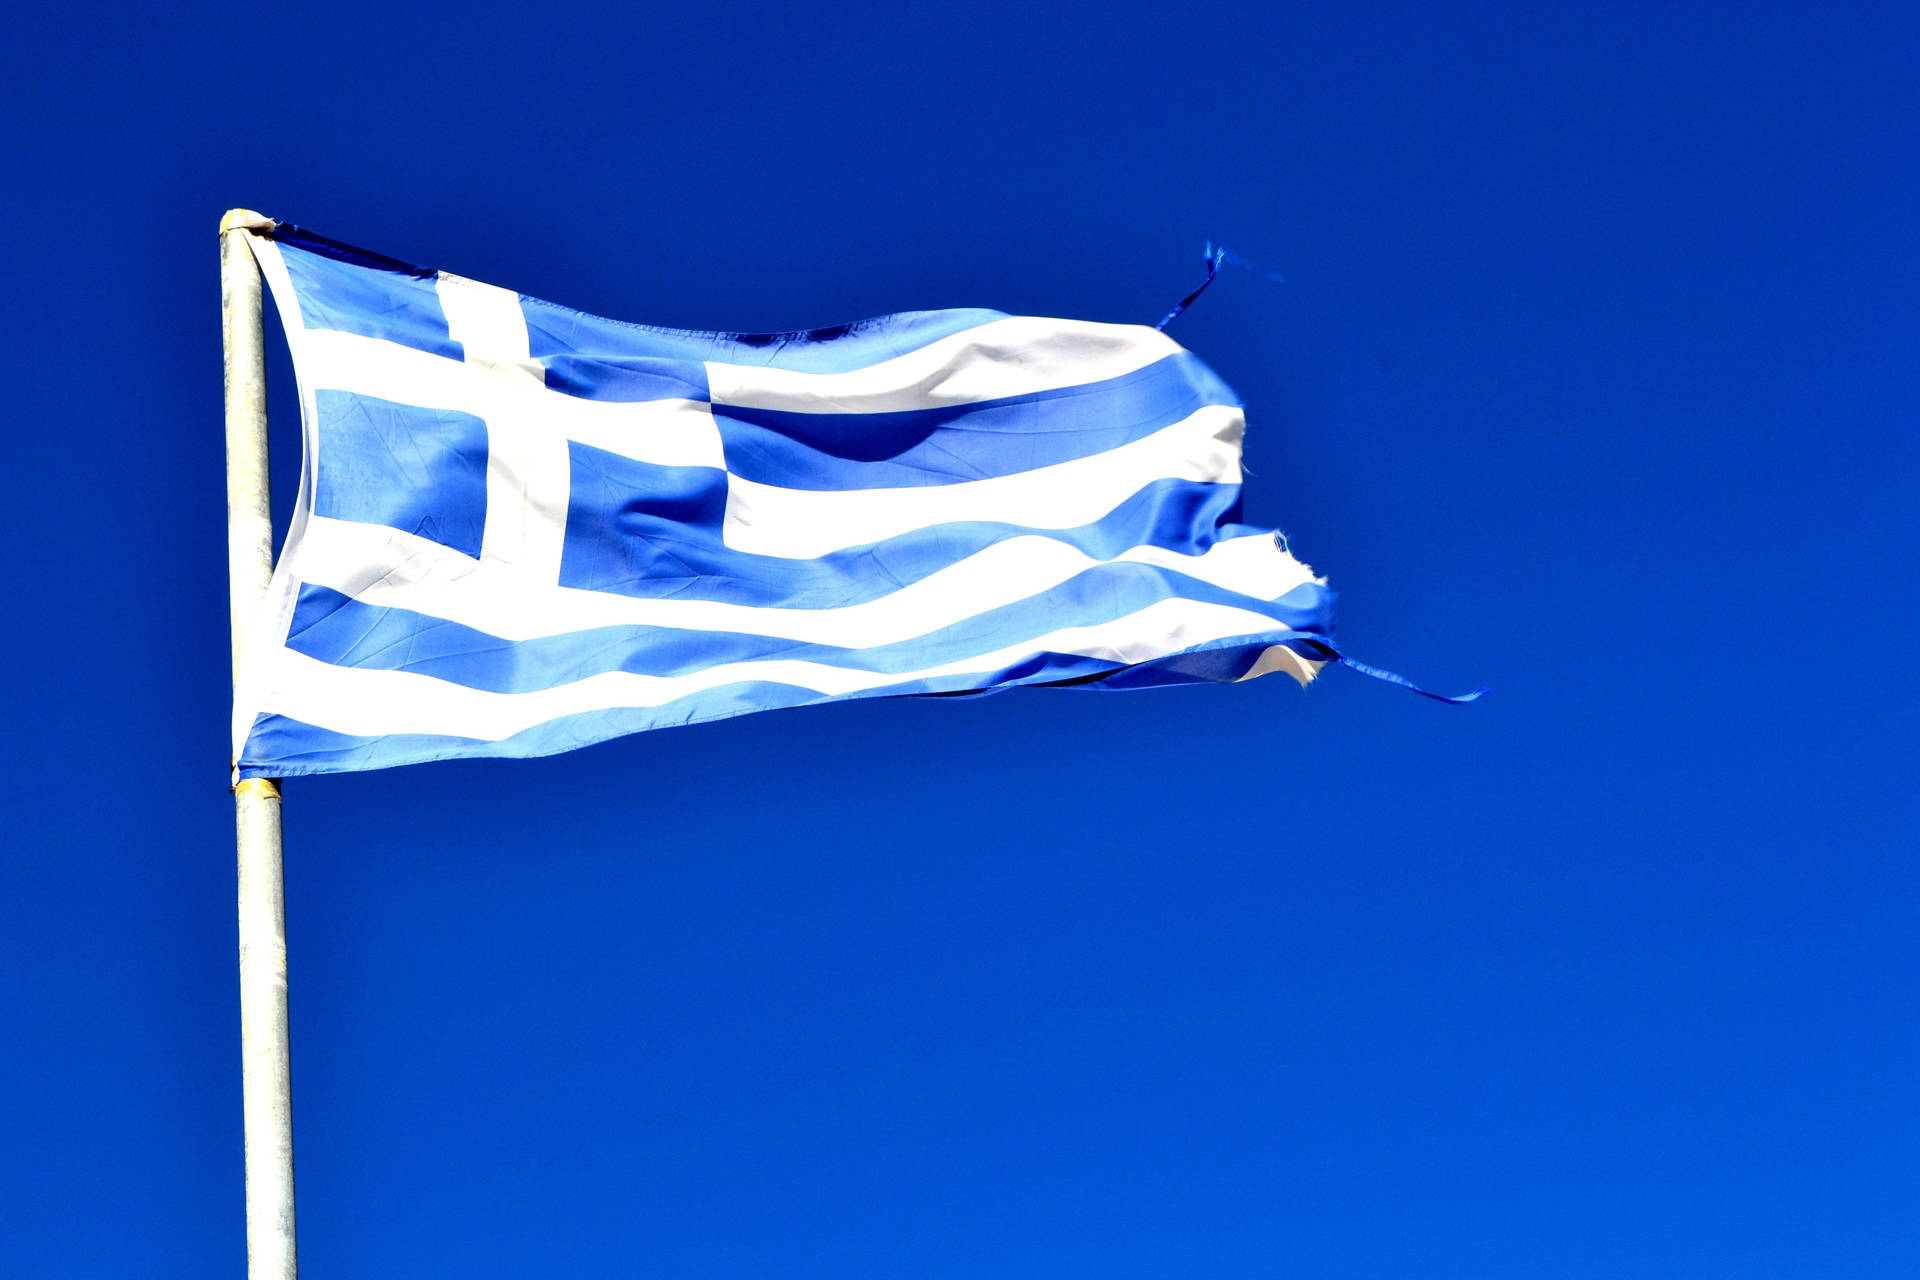 Majestic View Of The Greek Flag Against A Blue Sky Background